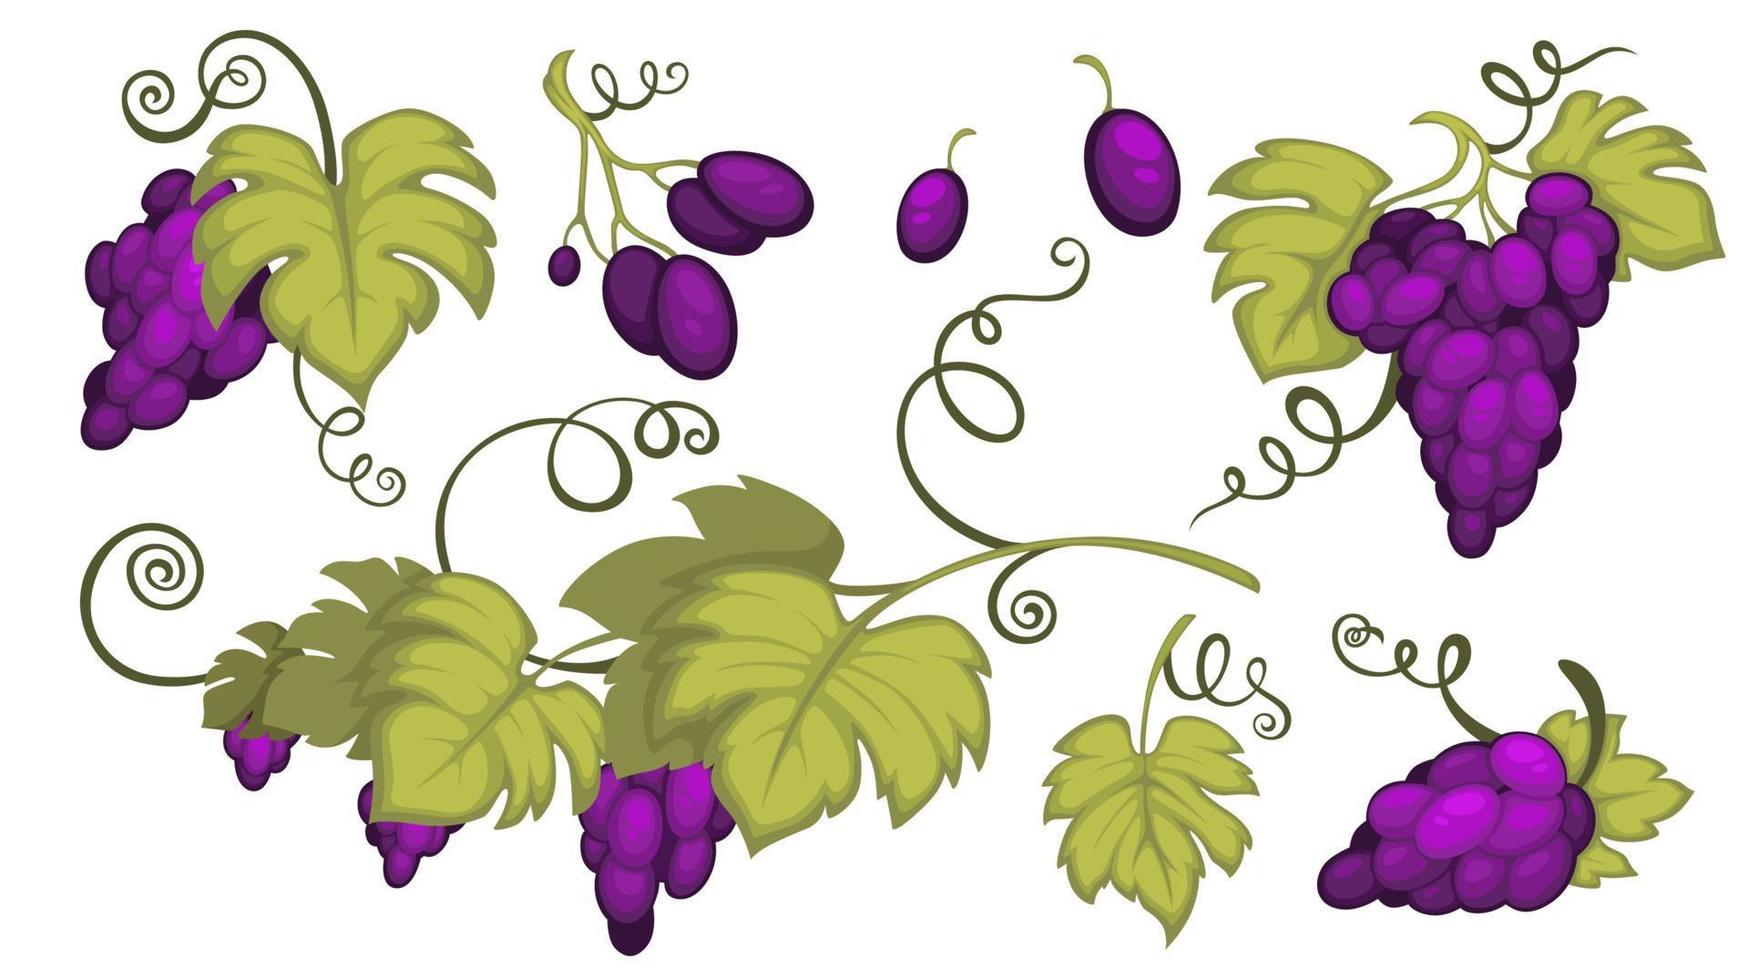 Growing grapes with berries and leaves branches vector